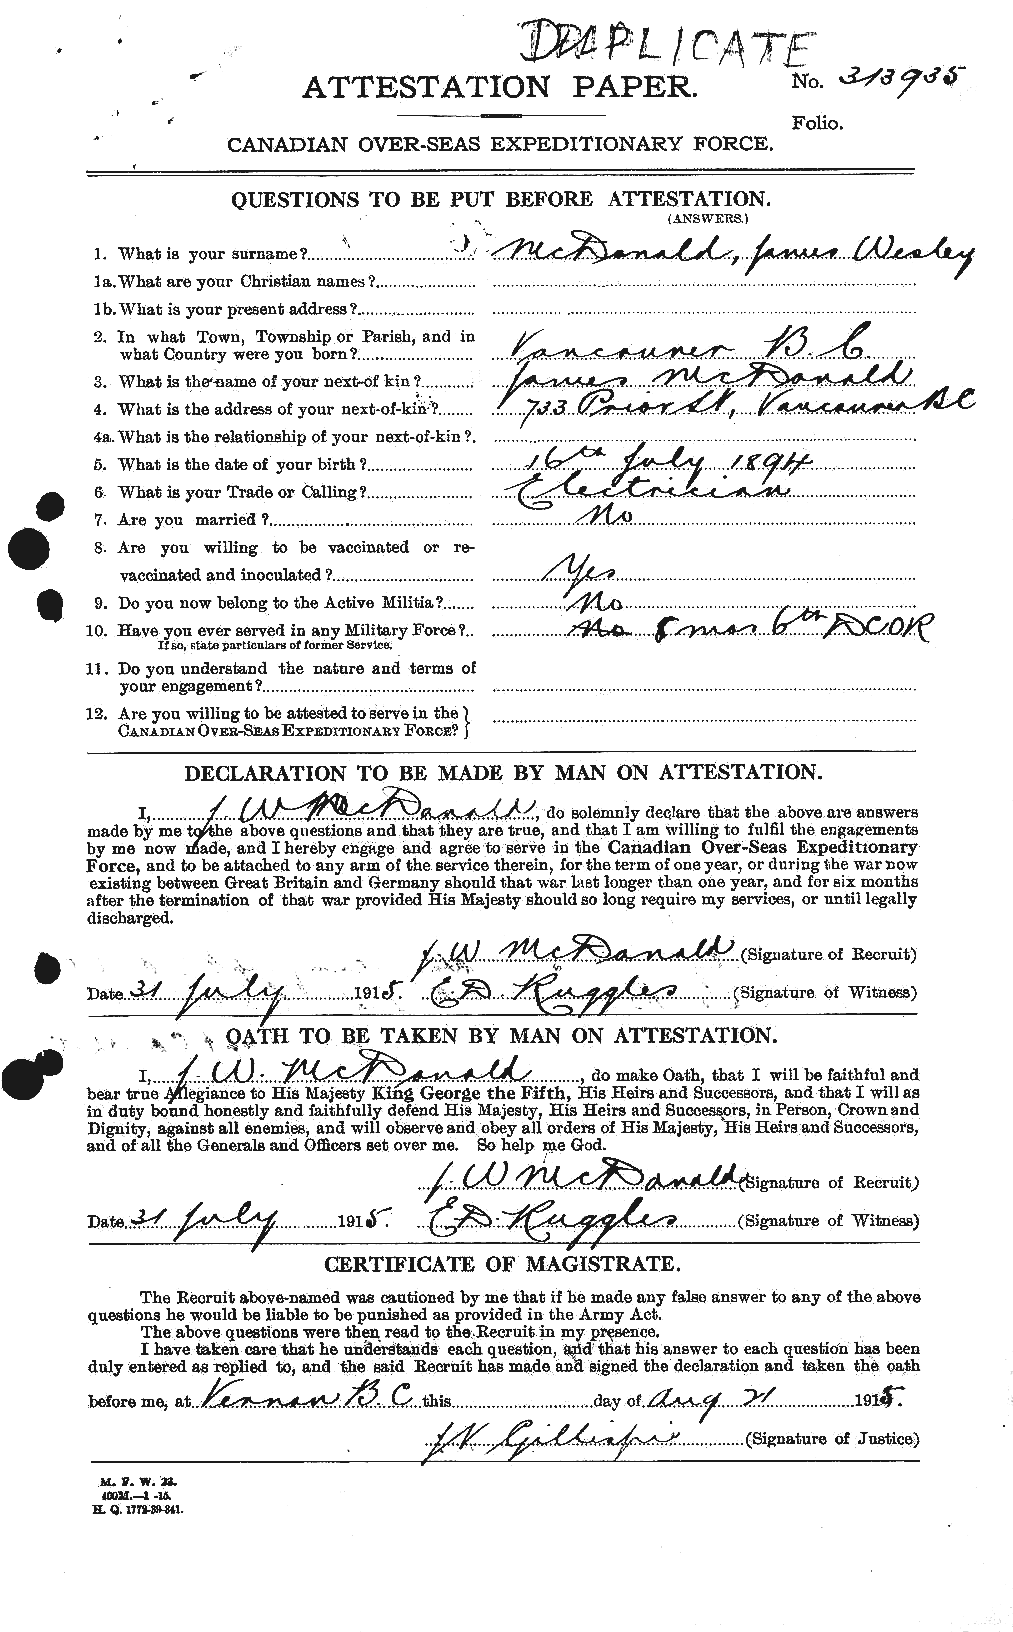 Personnel Records of the First World War - CEF 532162a